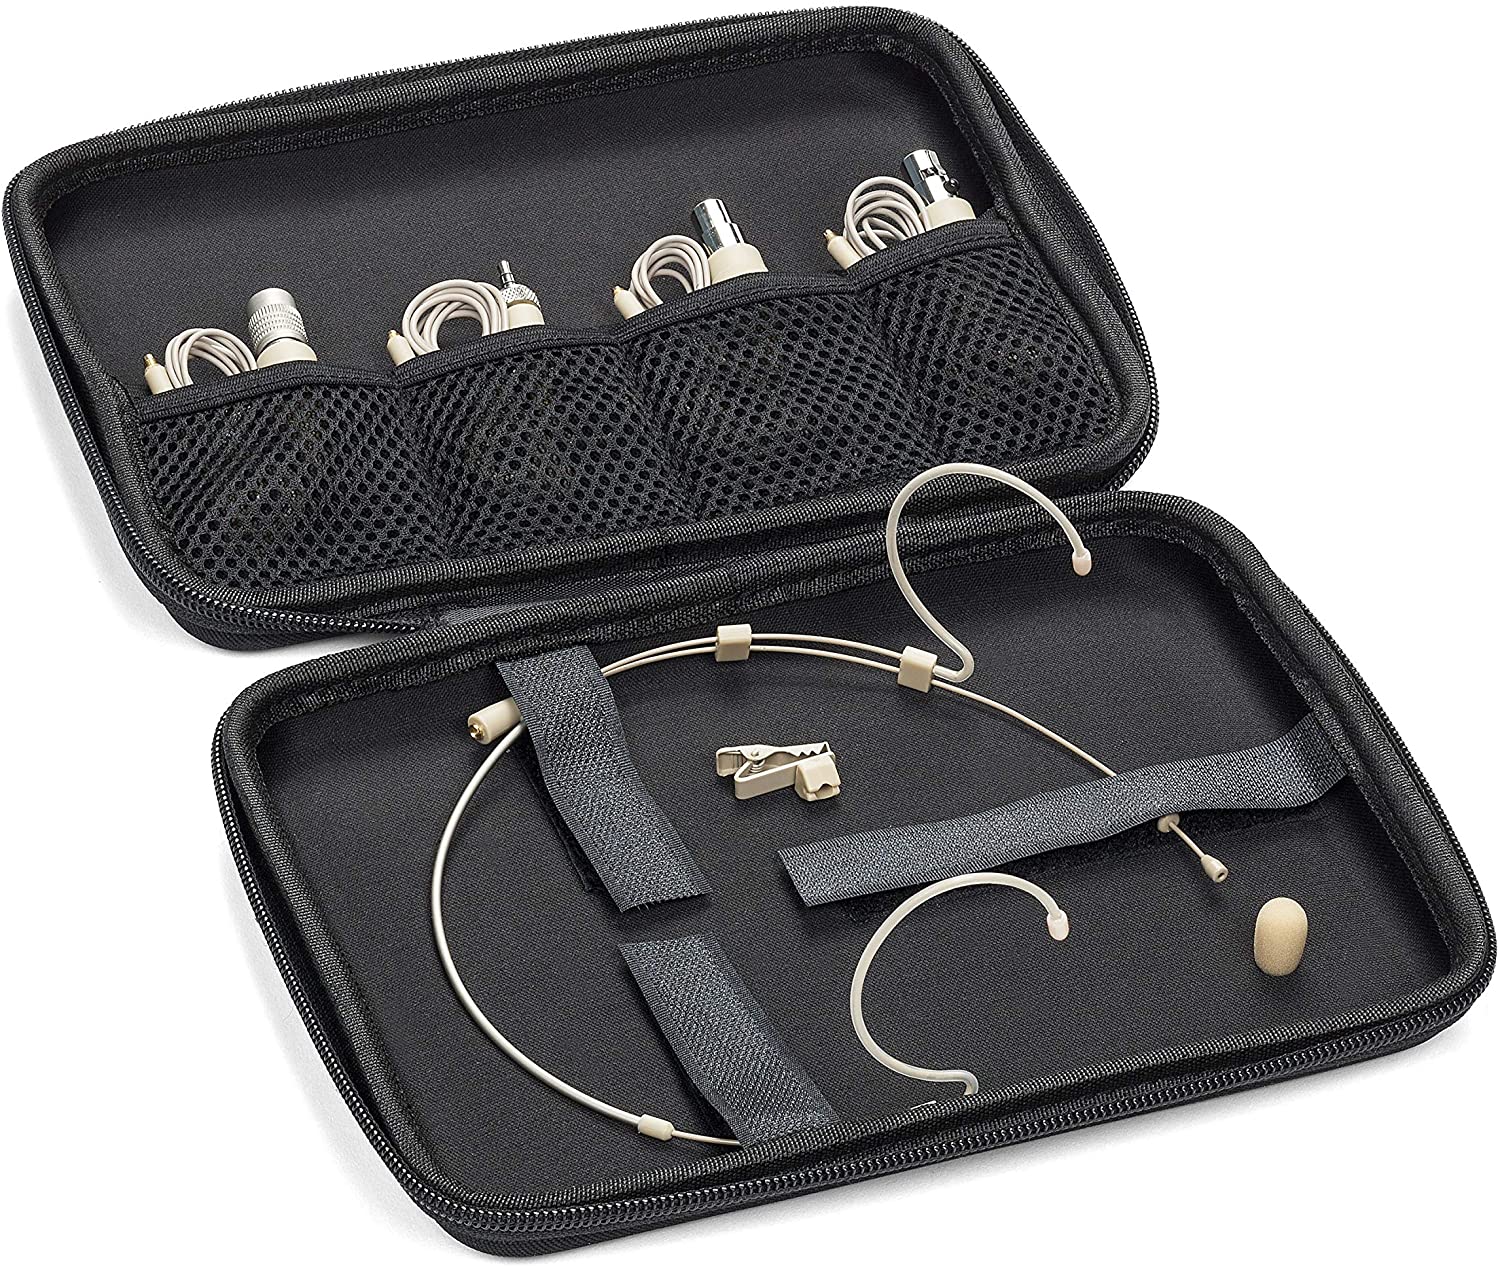 Samson DE10x Omnidirectional Headset Microphone with Miniature Condenser Capsule - Four Adapter Cables - Pro-Distributing